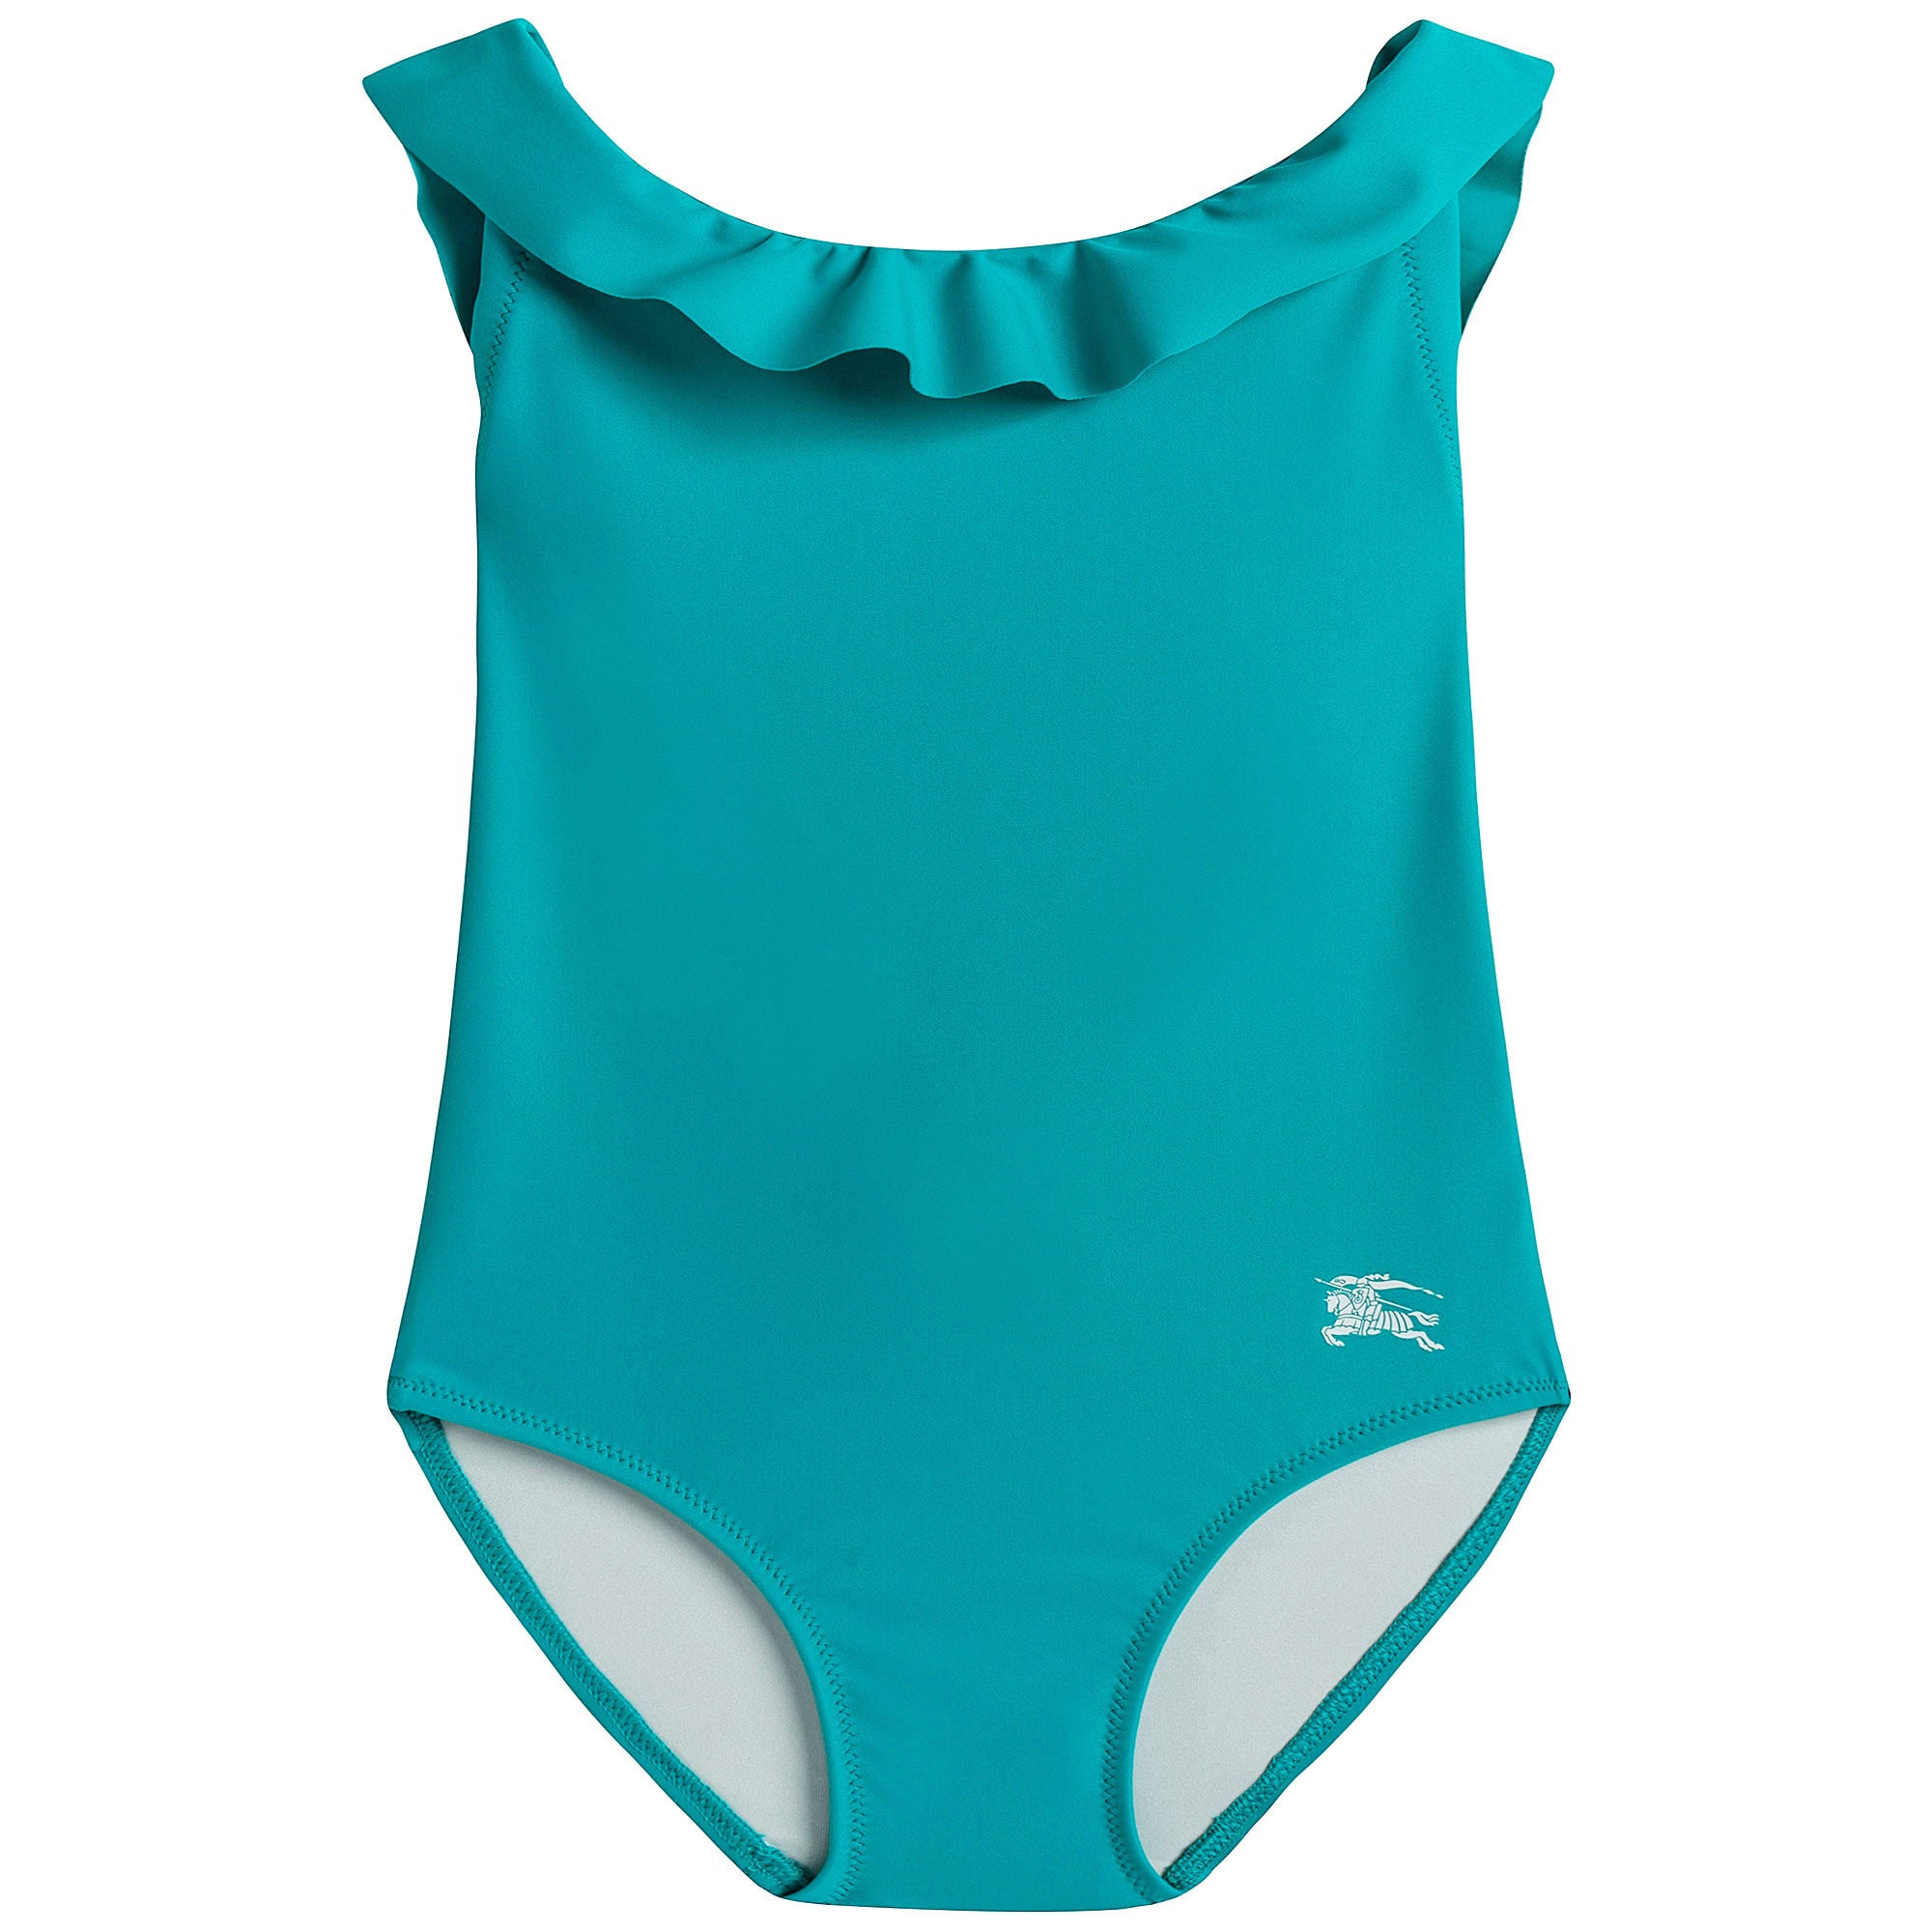 Girls Turquoise blue Loutus Leaf With Swimsuit - CÉMAROSE | Children's Fashion Store - 1